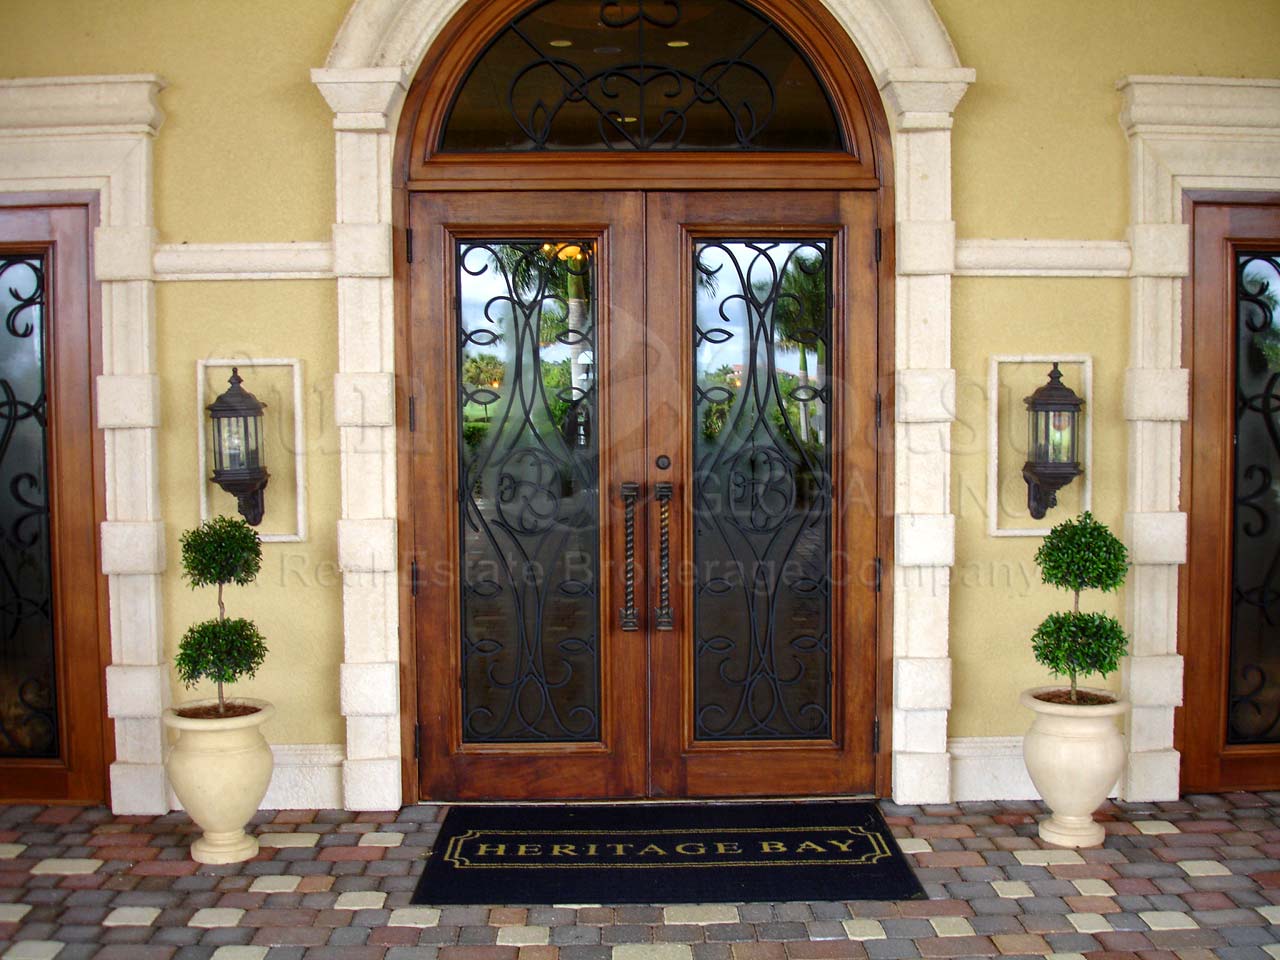 HERITAGE BAY Golf and Country Club entrance